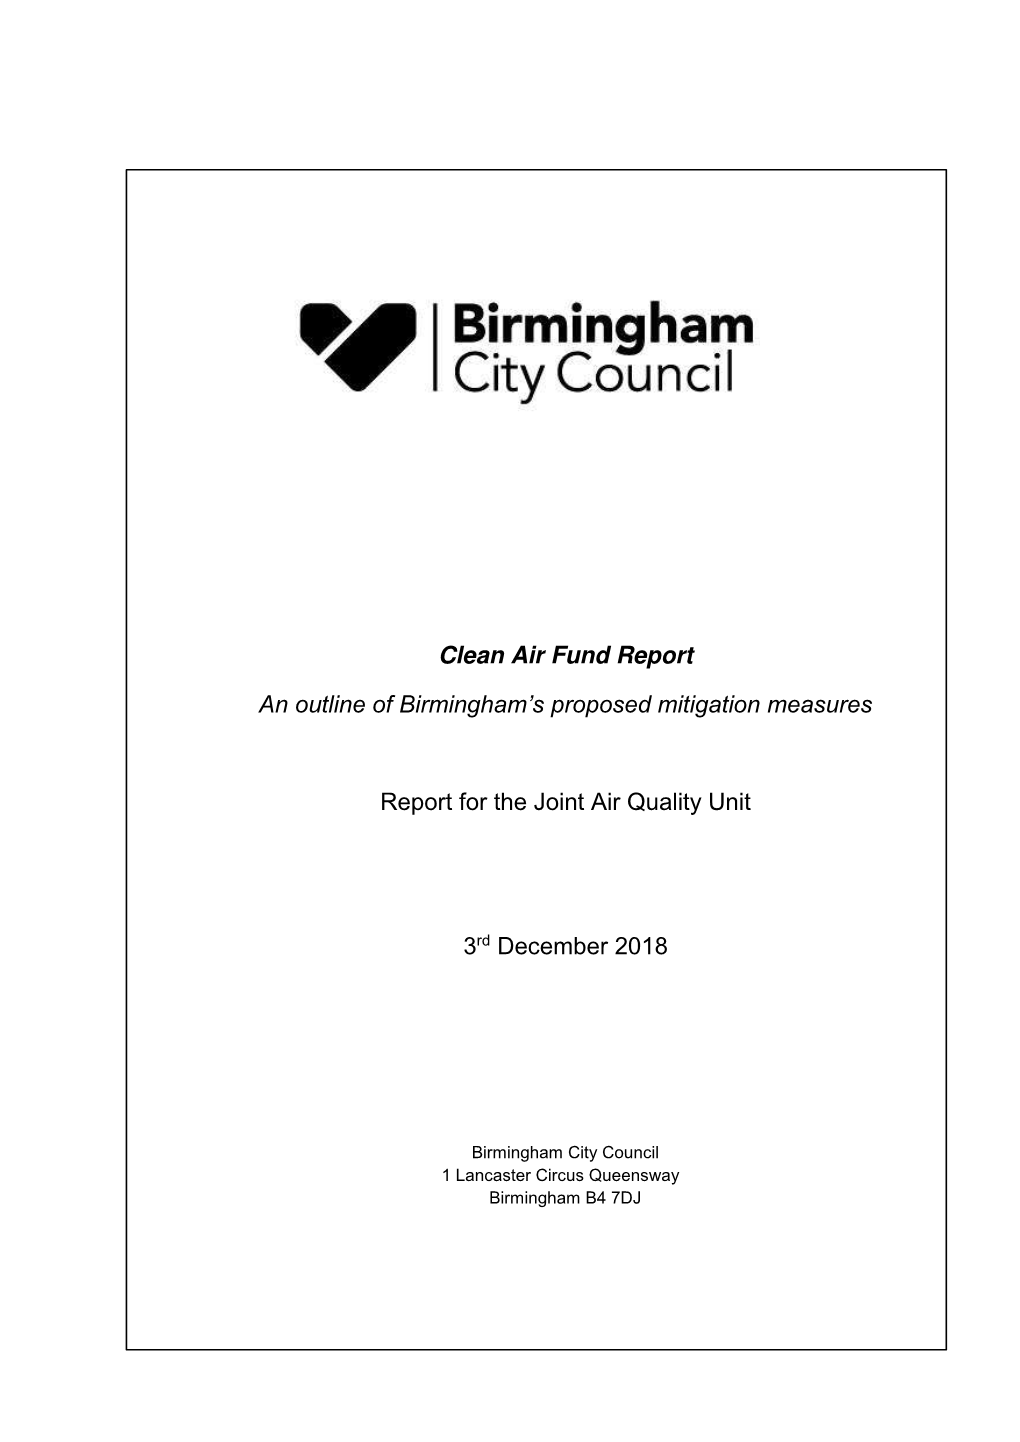 Clean Air Fund Report an Outline of Birmingham's Proposed Mitigation